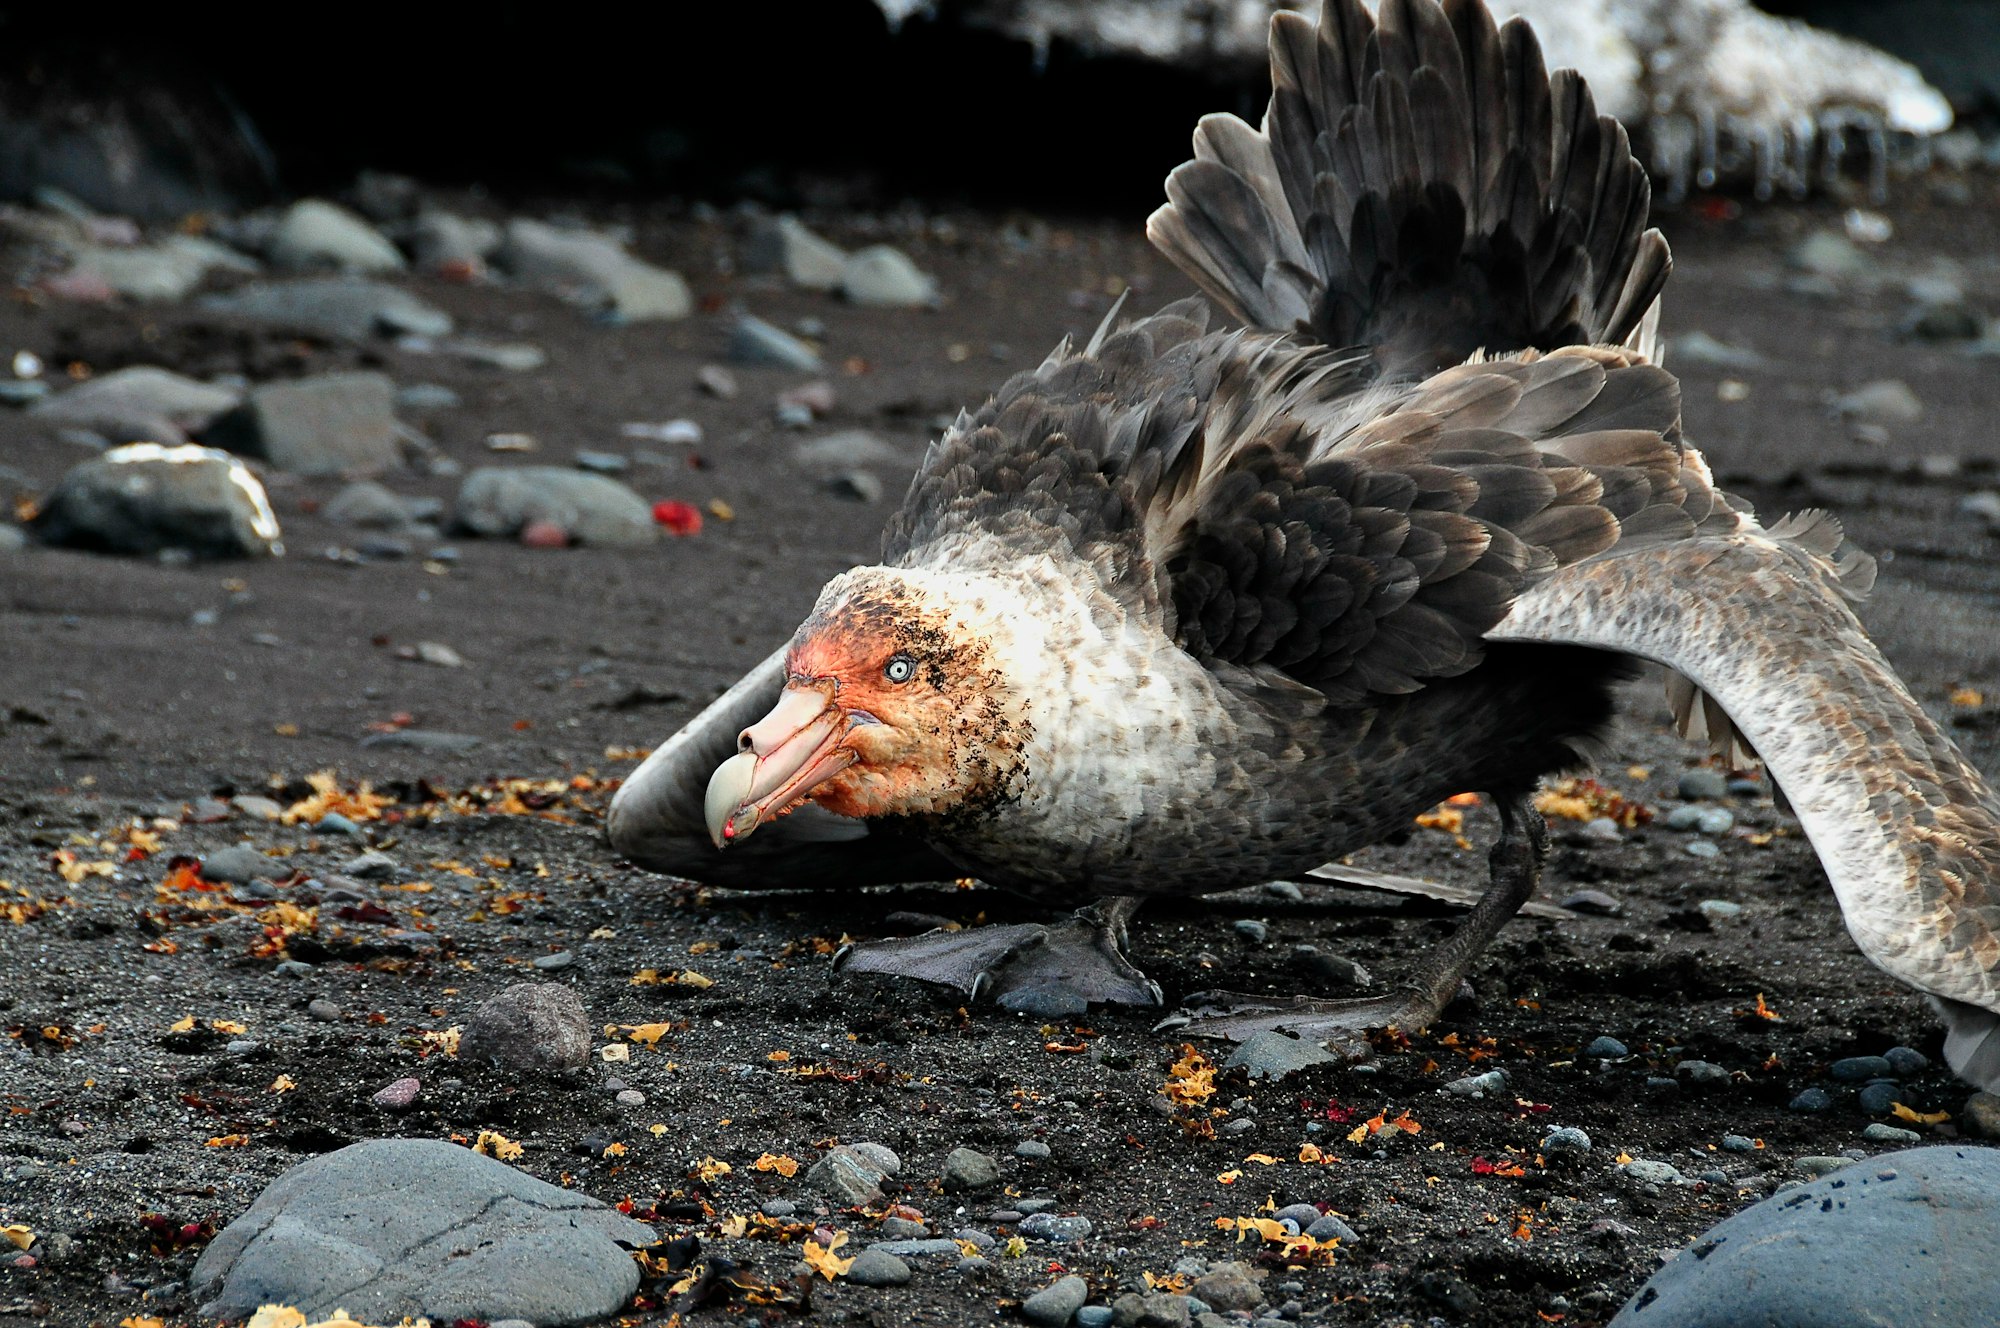 Wiki Plus - A southern giant petrel uses the posture known as the seal master posture- wings outstretched, tail raise and beak pointed at the enemy - to guard its meal from an intruder. 